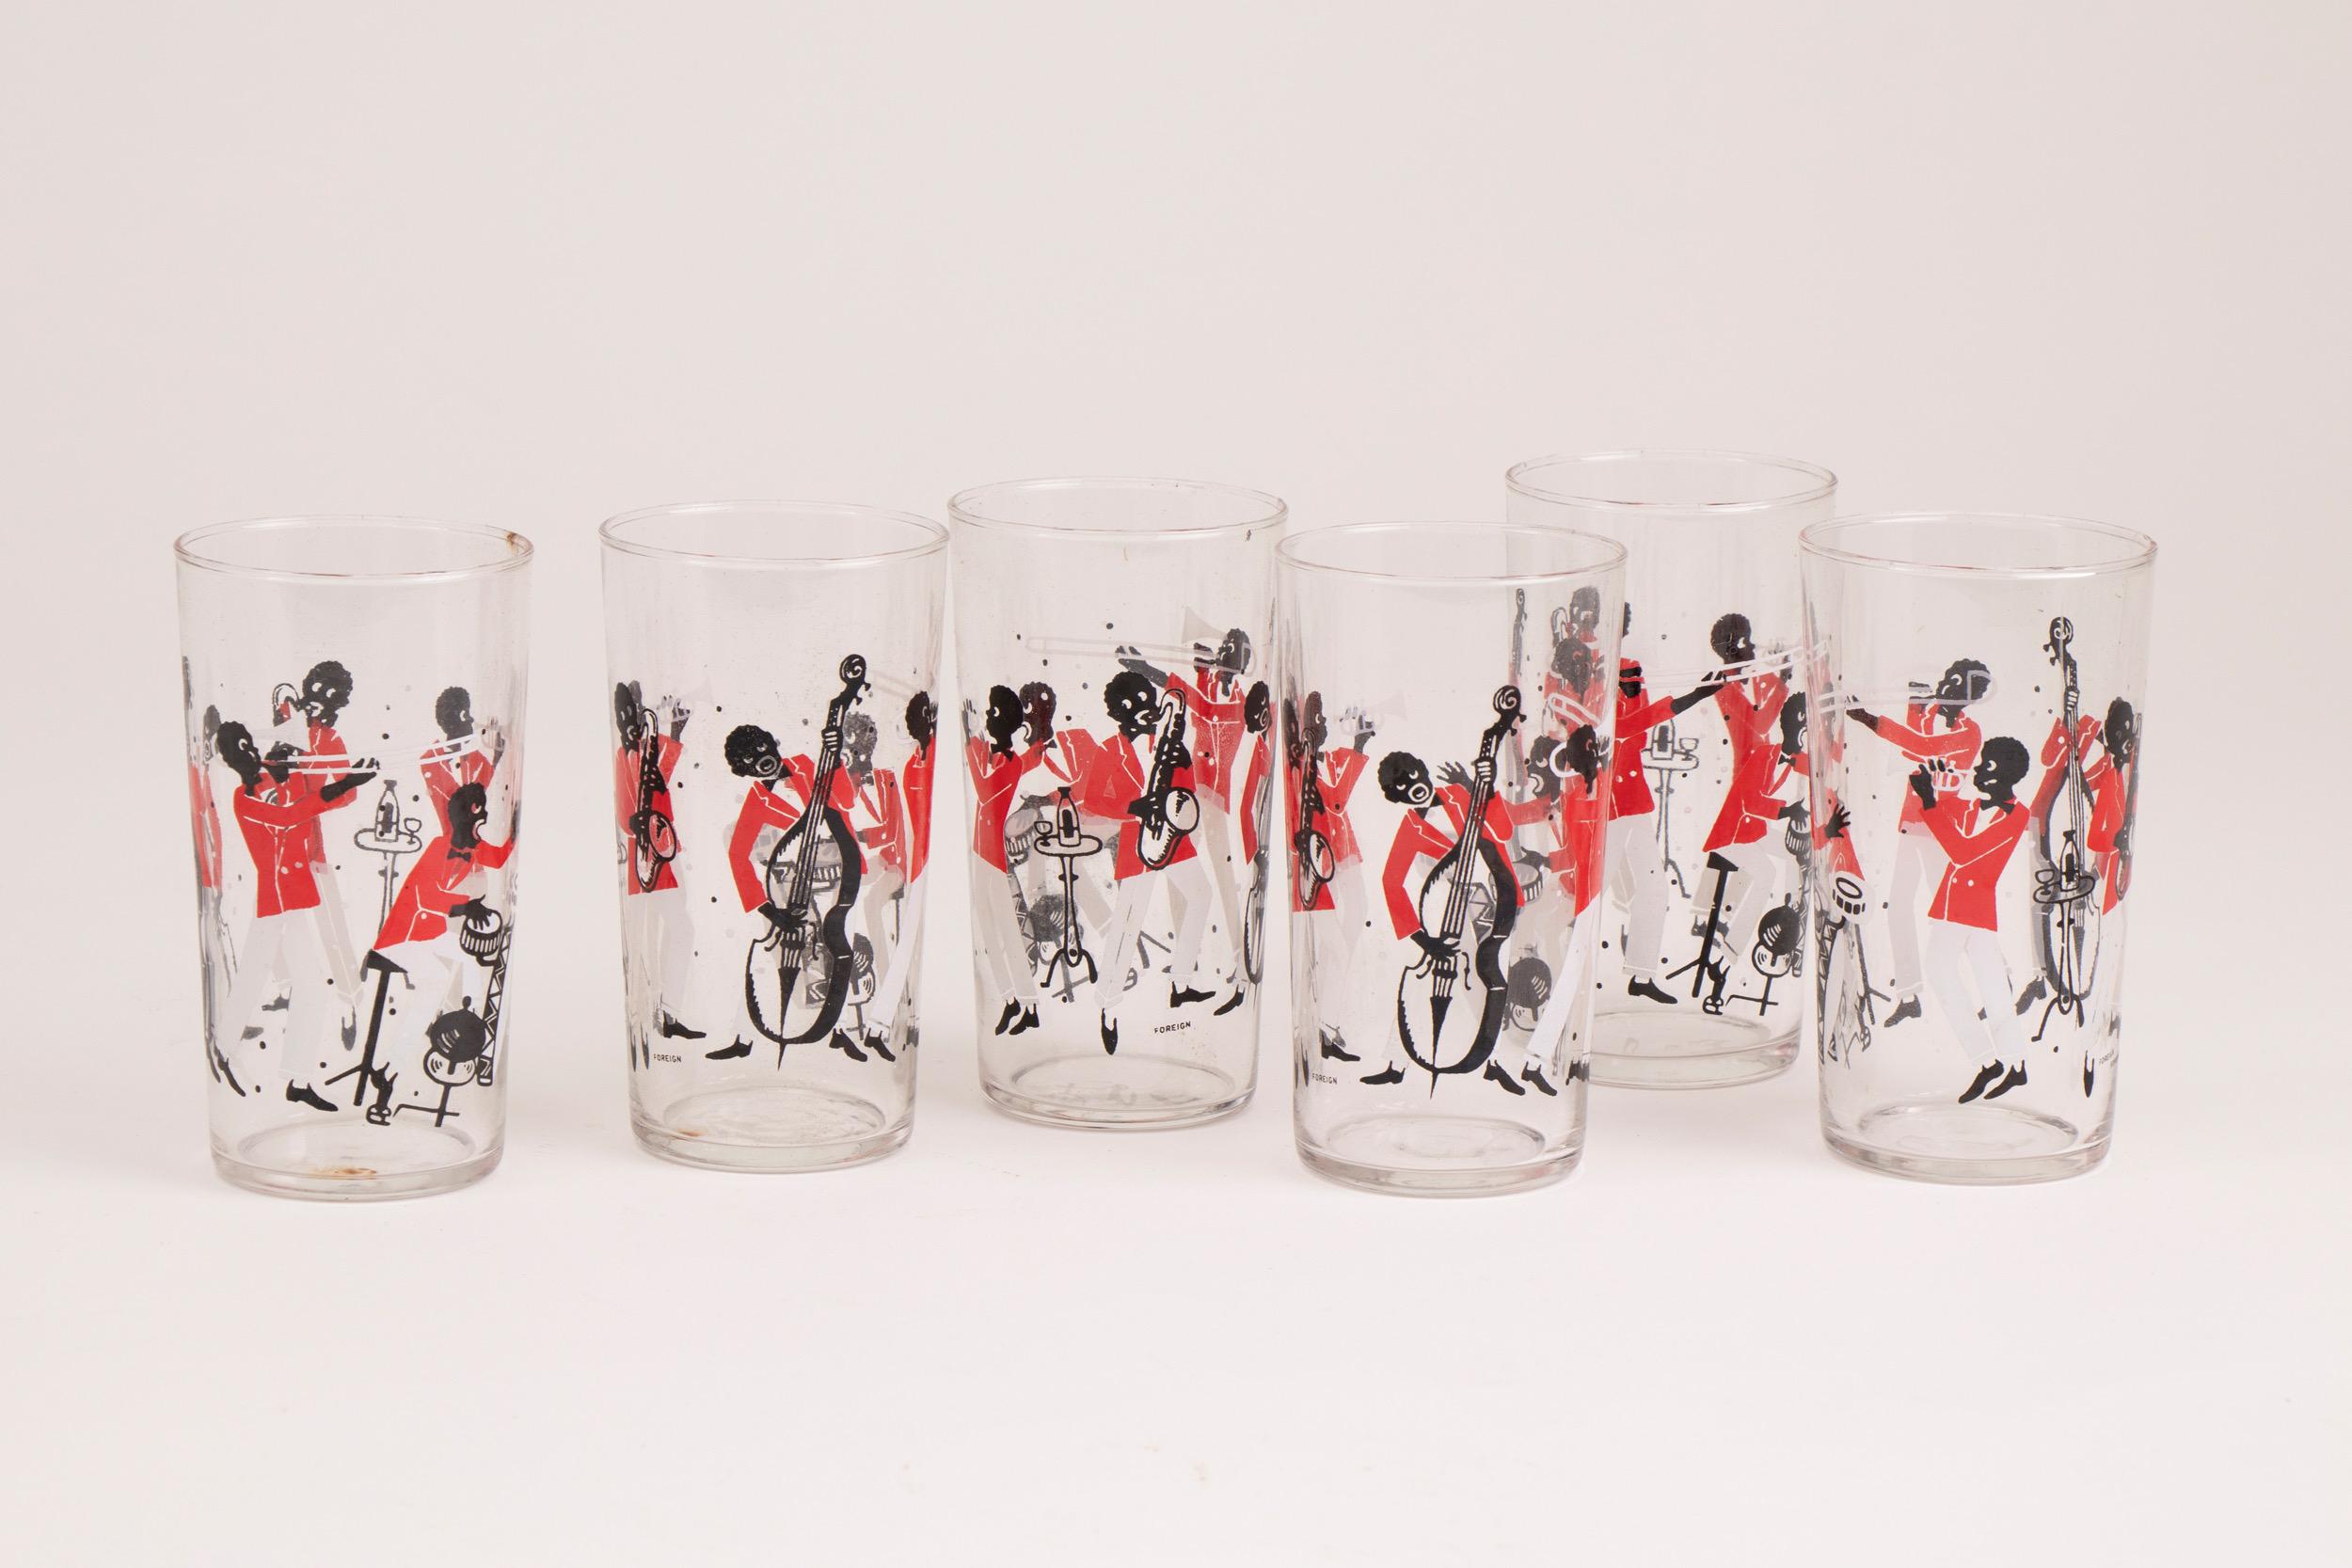 Art Deco boxed glass set.
Superb Art Deco high ball glasses depicting a Jazz band.
Each glass is 12 cm height, 6.5 cm diameter
Marked Foreign
Italian
circa 1930.

  